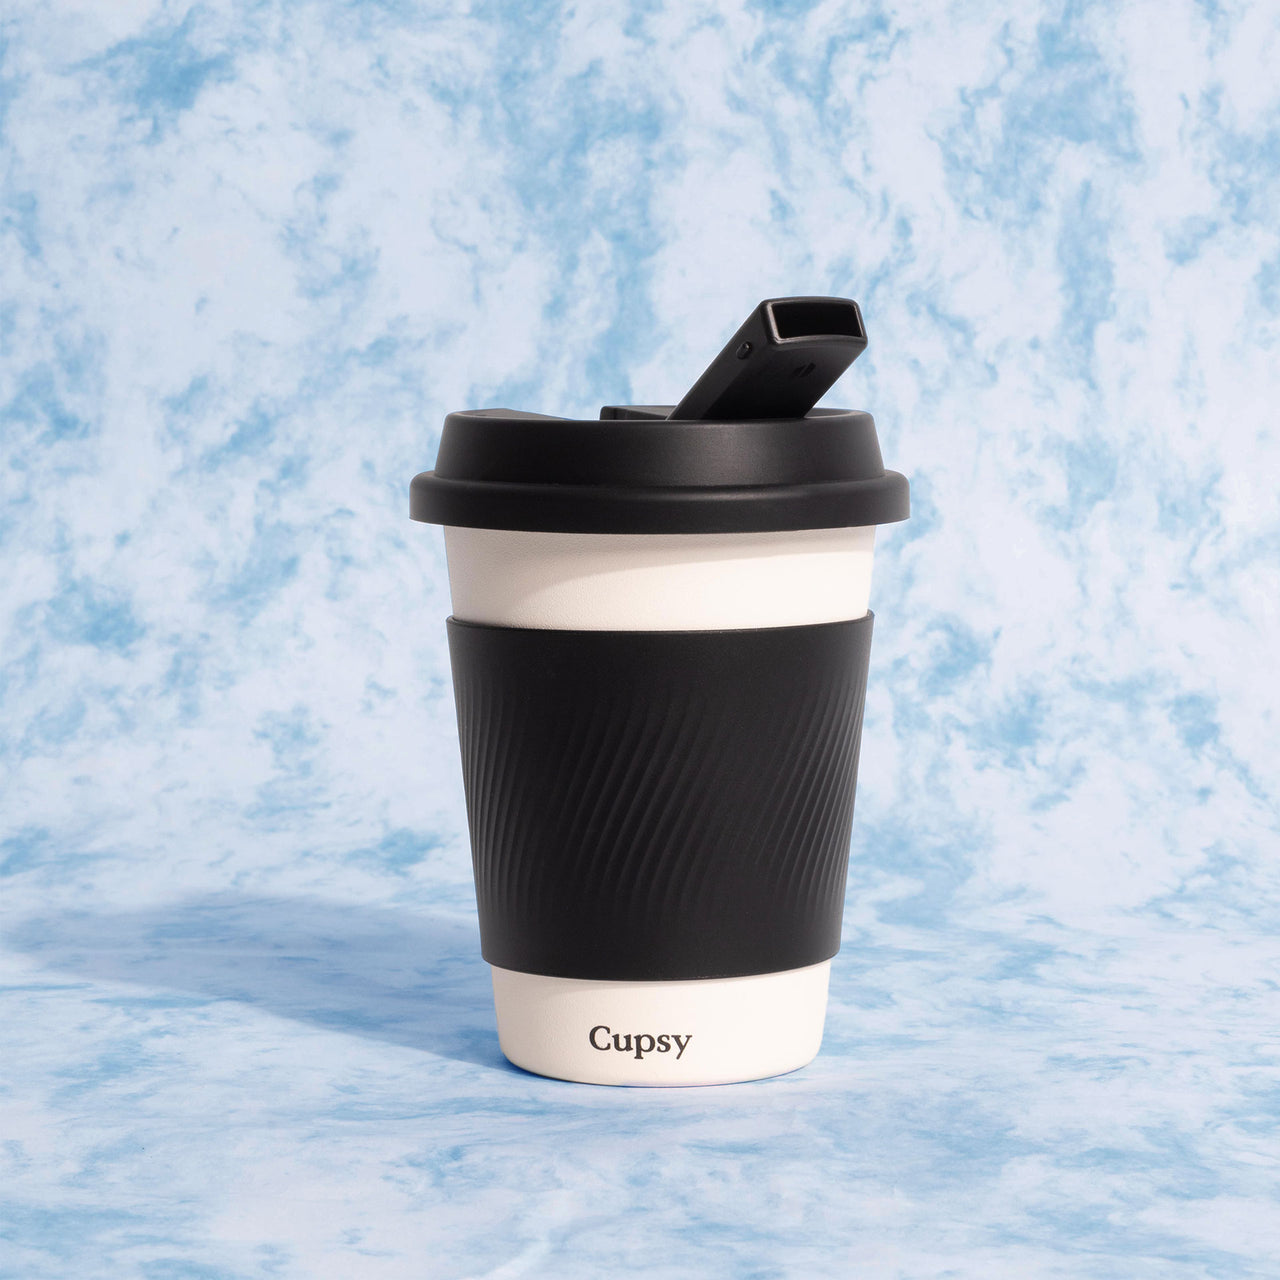 Cupsy: To-go water pipe